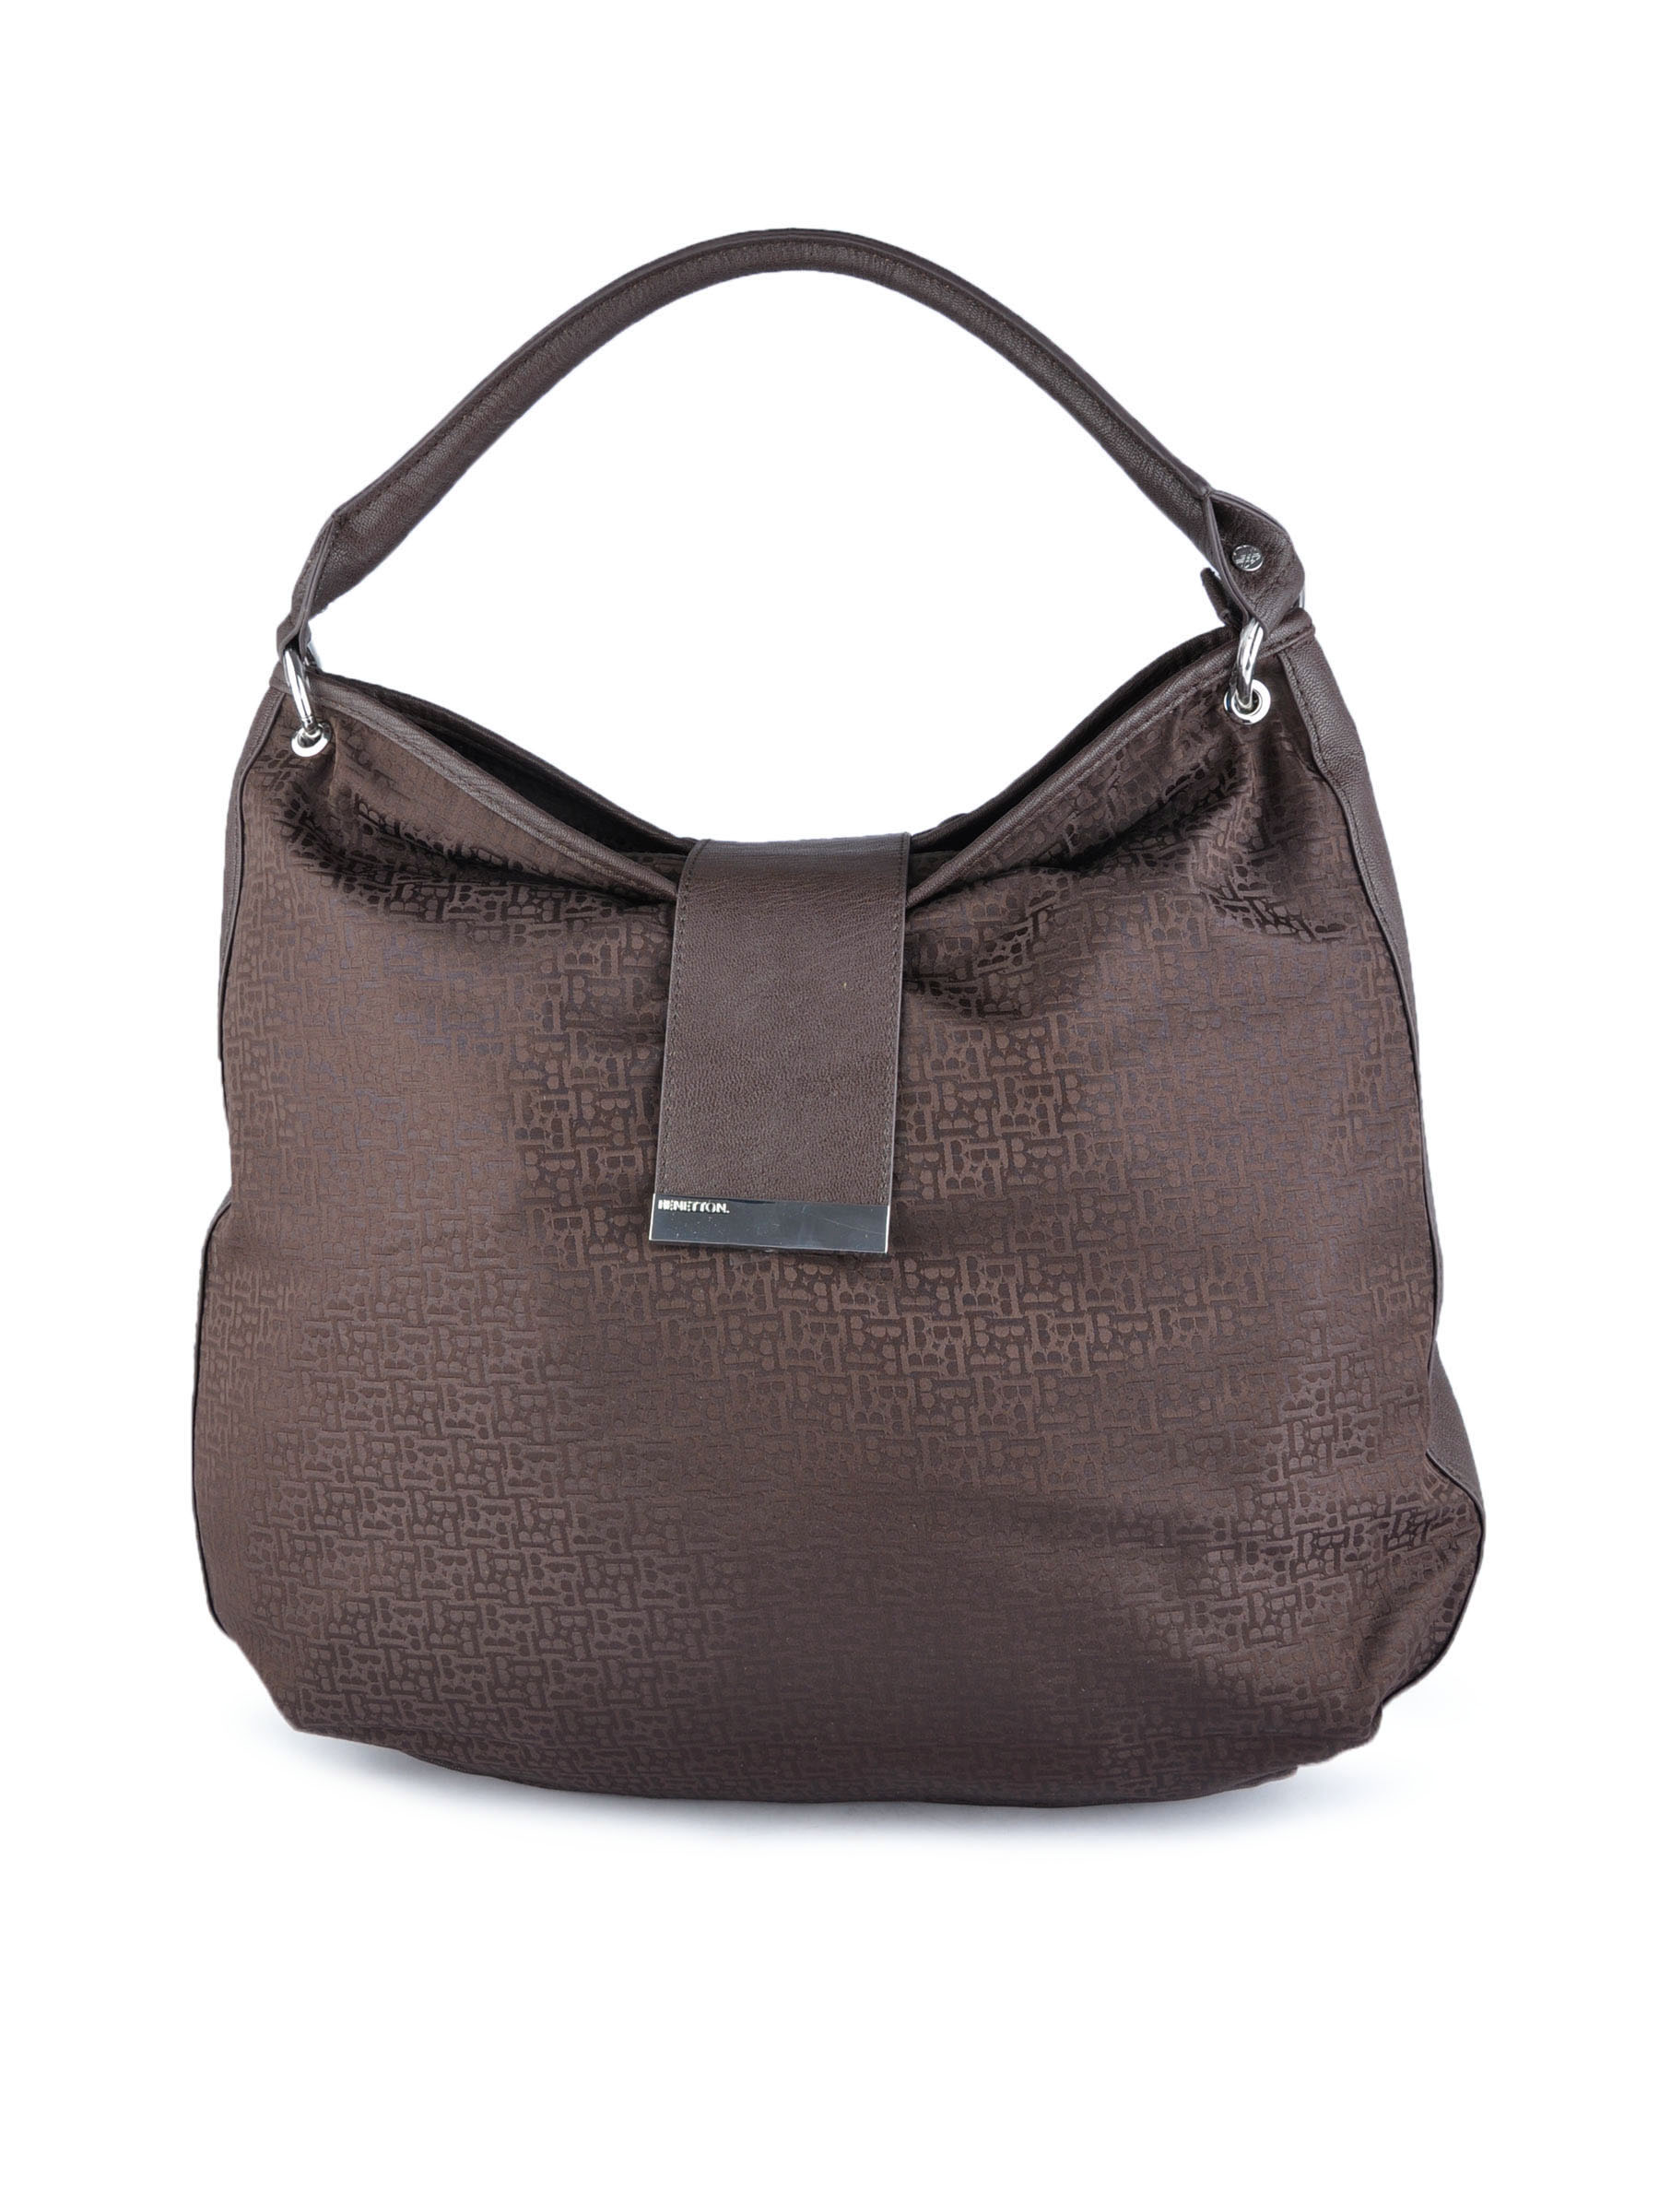 United Colors of Benetton Women Solid Coffee Brown Handbags